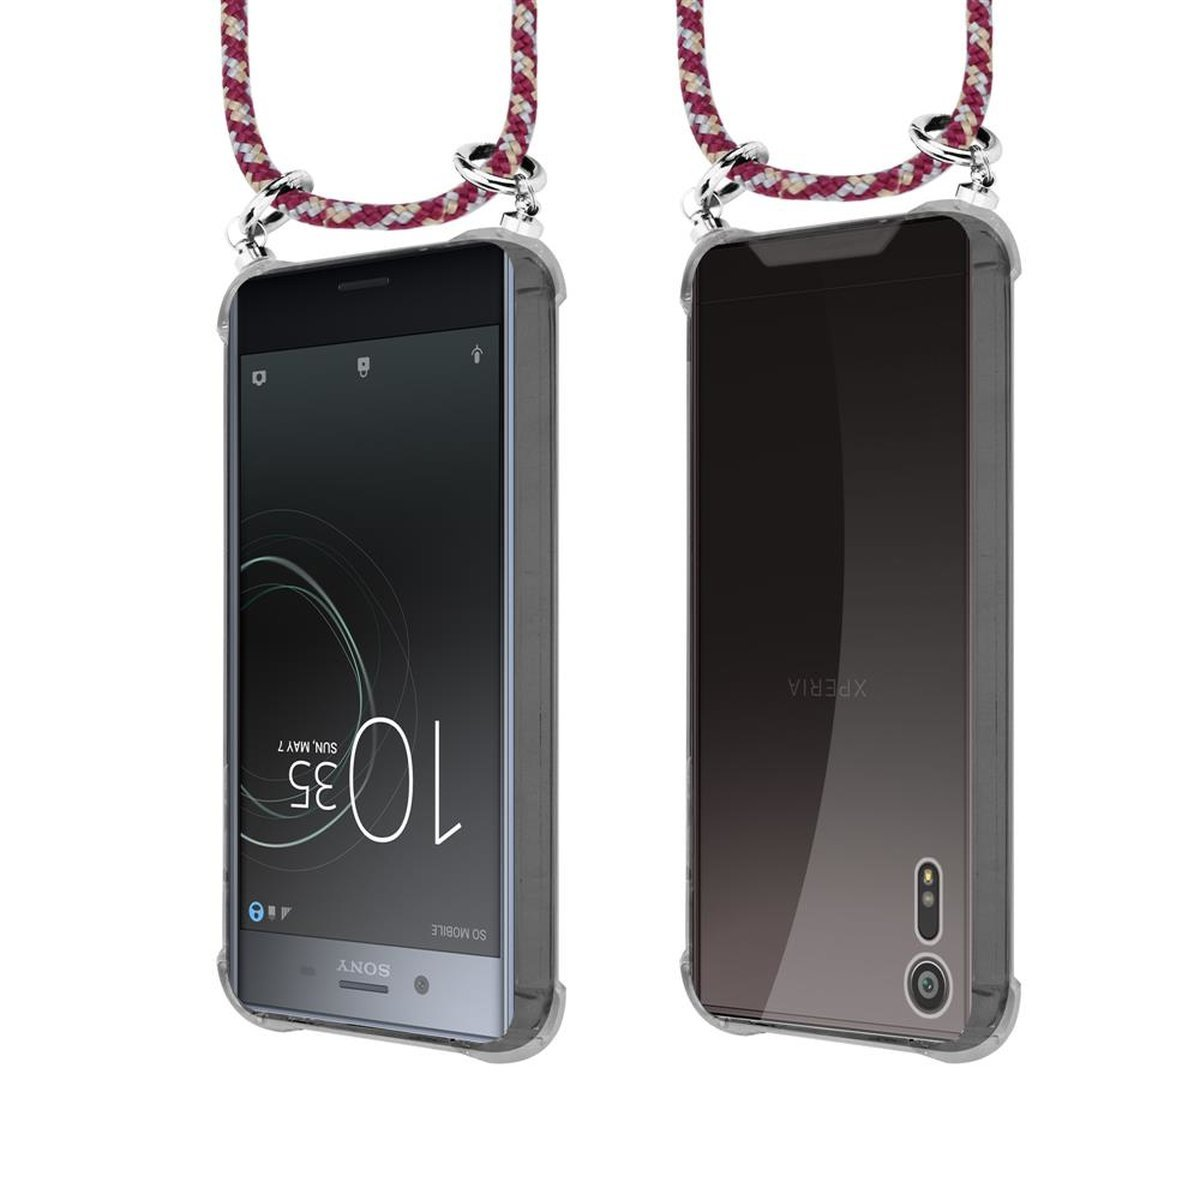 CADORABO Handy Kette mit / Sony, Xperia WEIß XZ ROT XZs, Kordel Backcover, und Hülle, GELB Ringen, abnehmbarer Silber Band